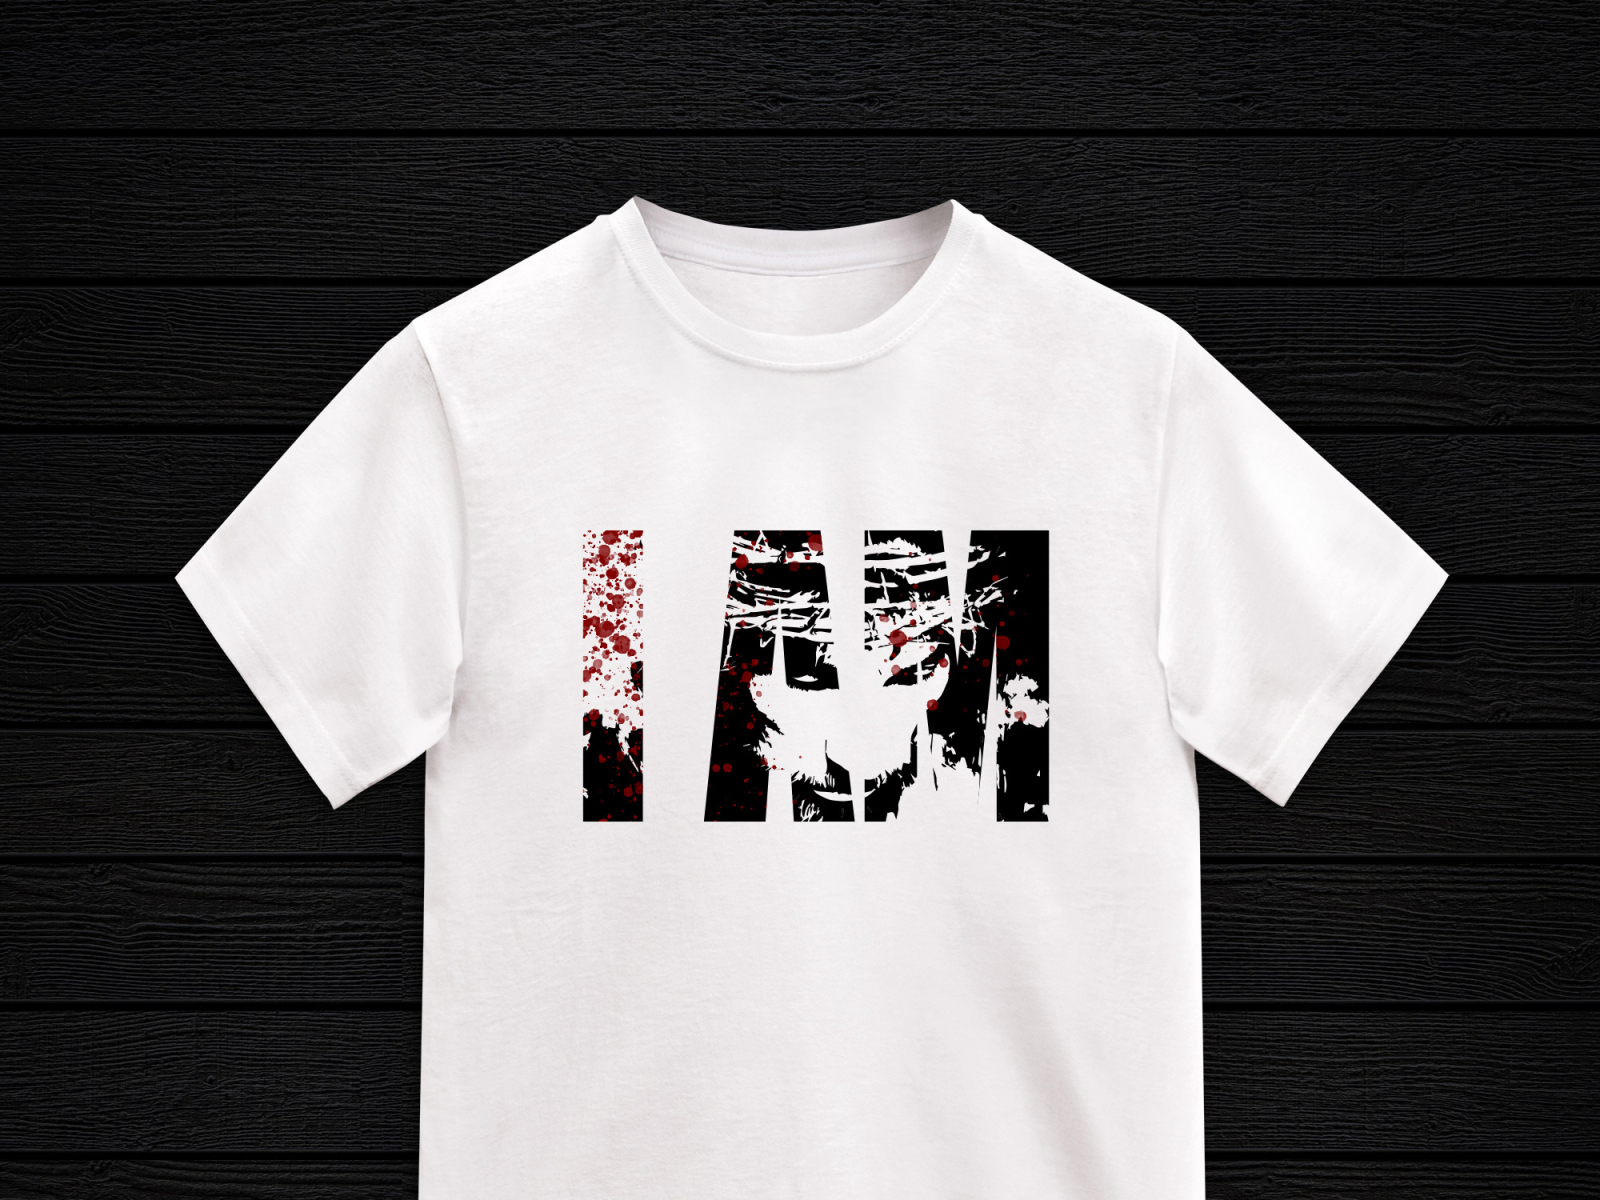 I AM tshirt by Chris Marker on Dribbble